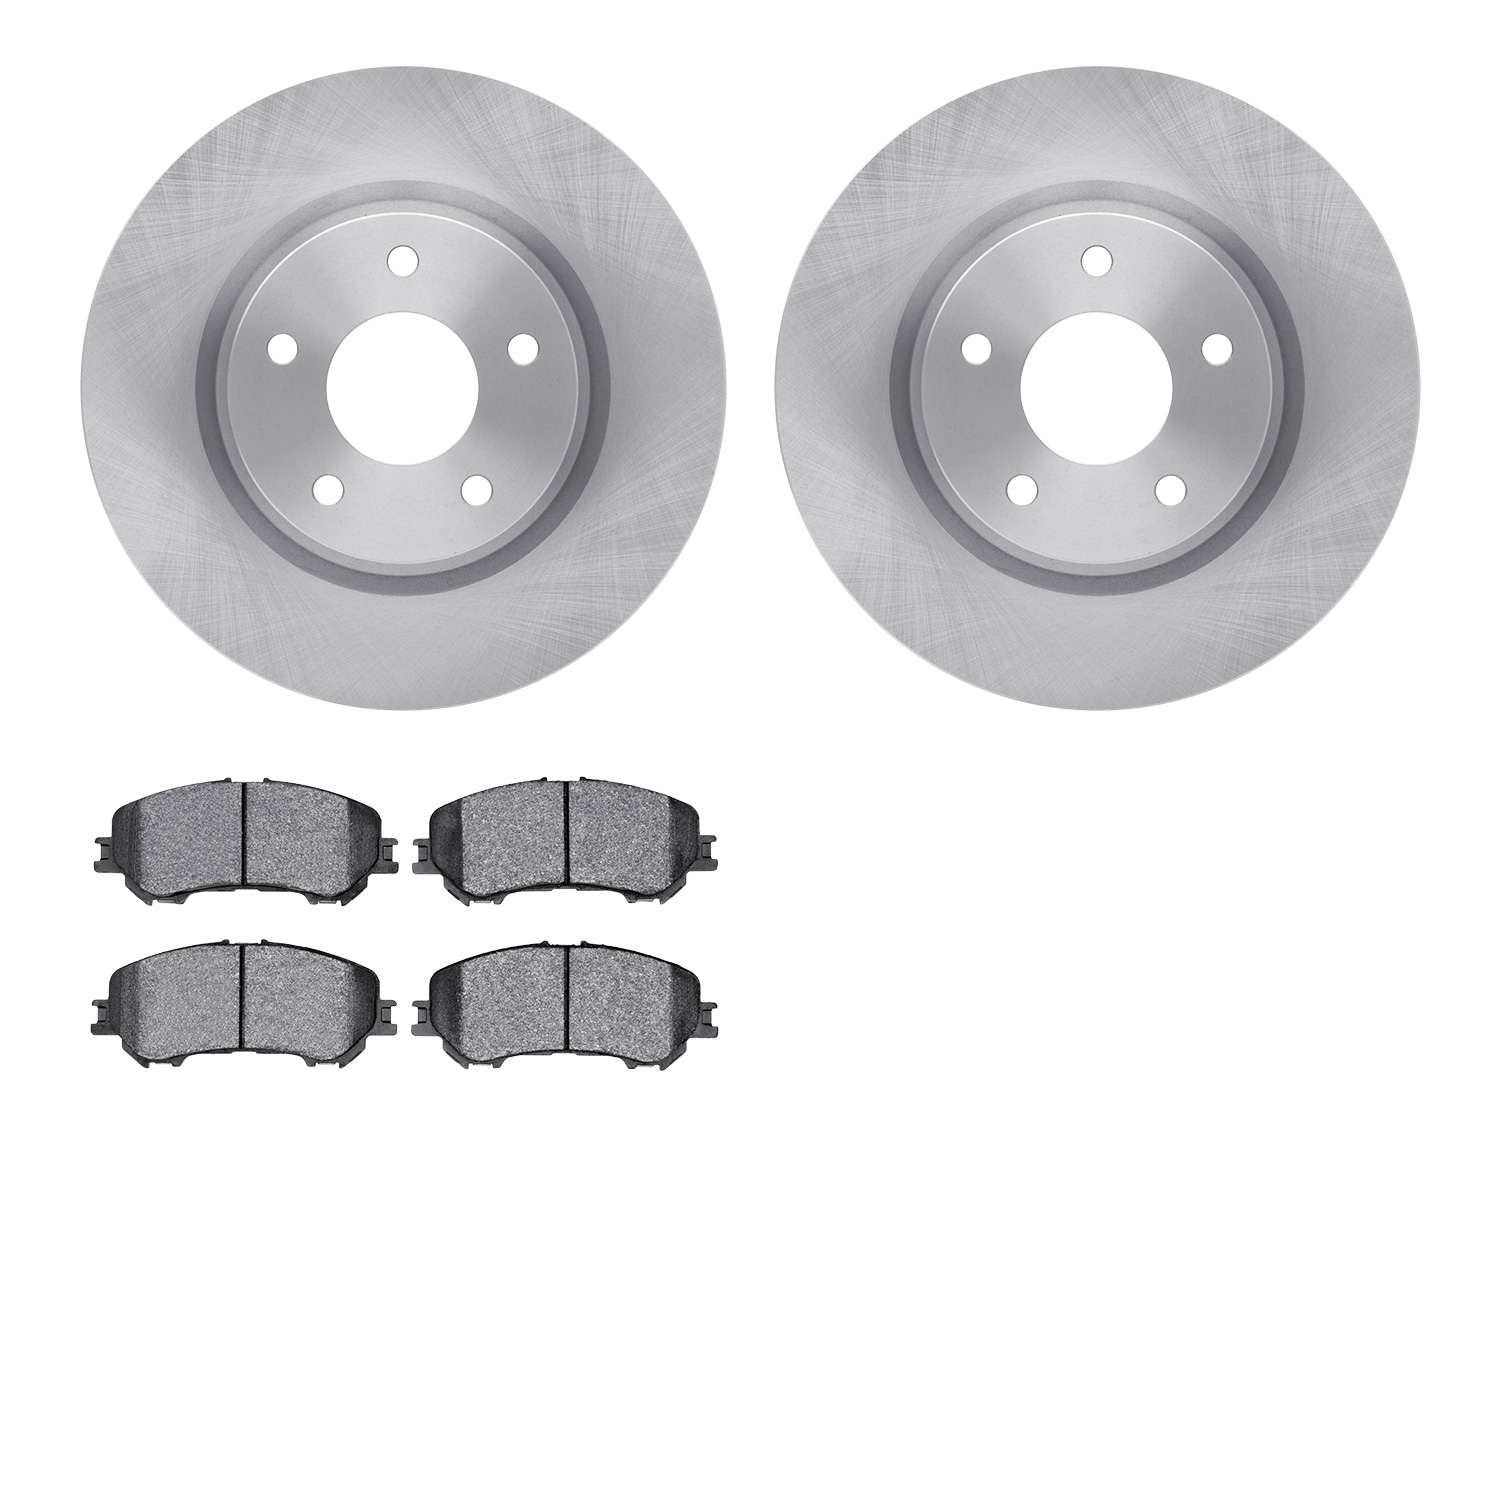 6302-67130 Brake Rotors with 3000-Series Ceramic Brake Pads Kit, Fits Select Multiple Makes/Models, Position: Front